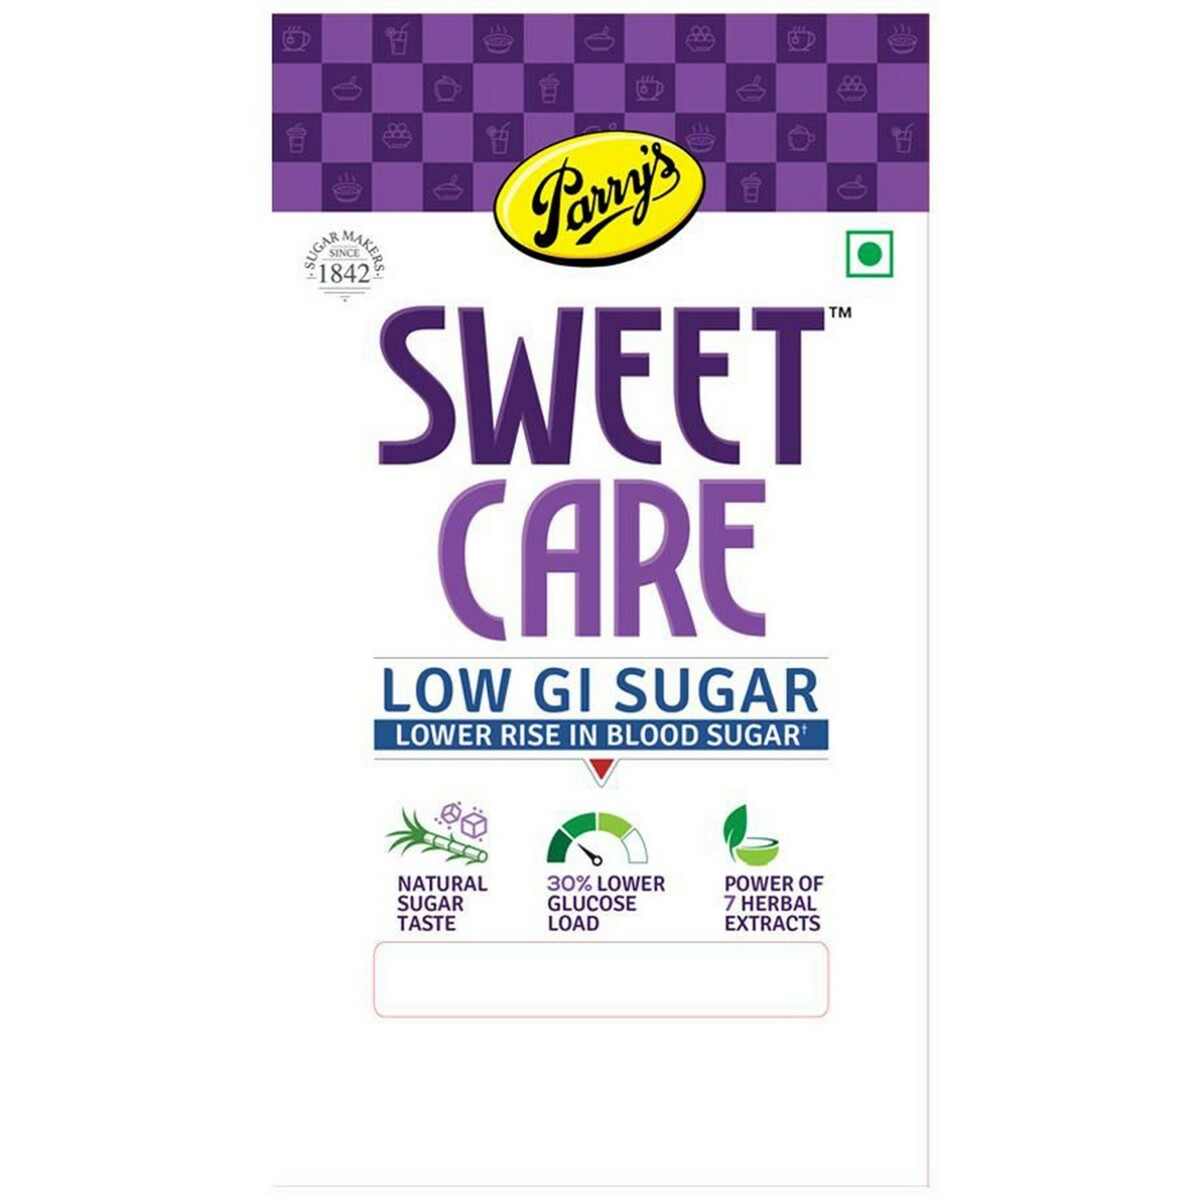 Parry's Sweet care Low GI Sugar 500g